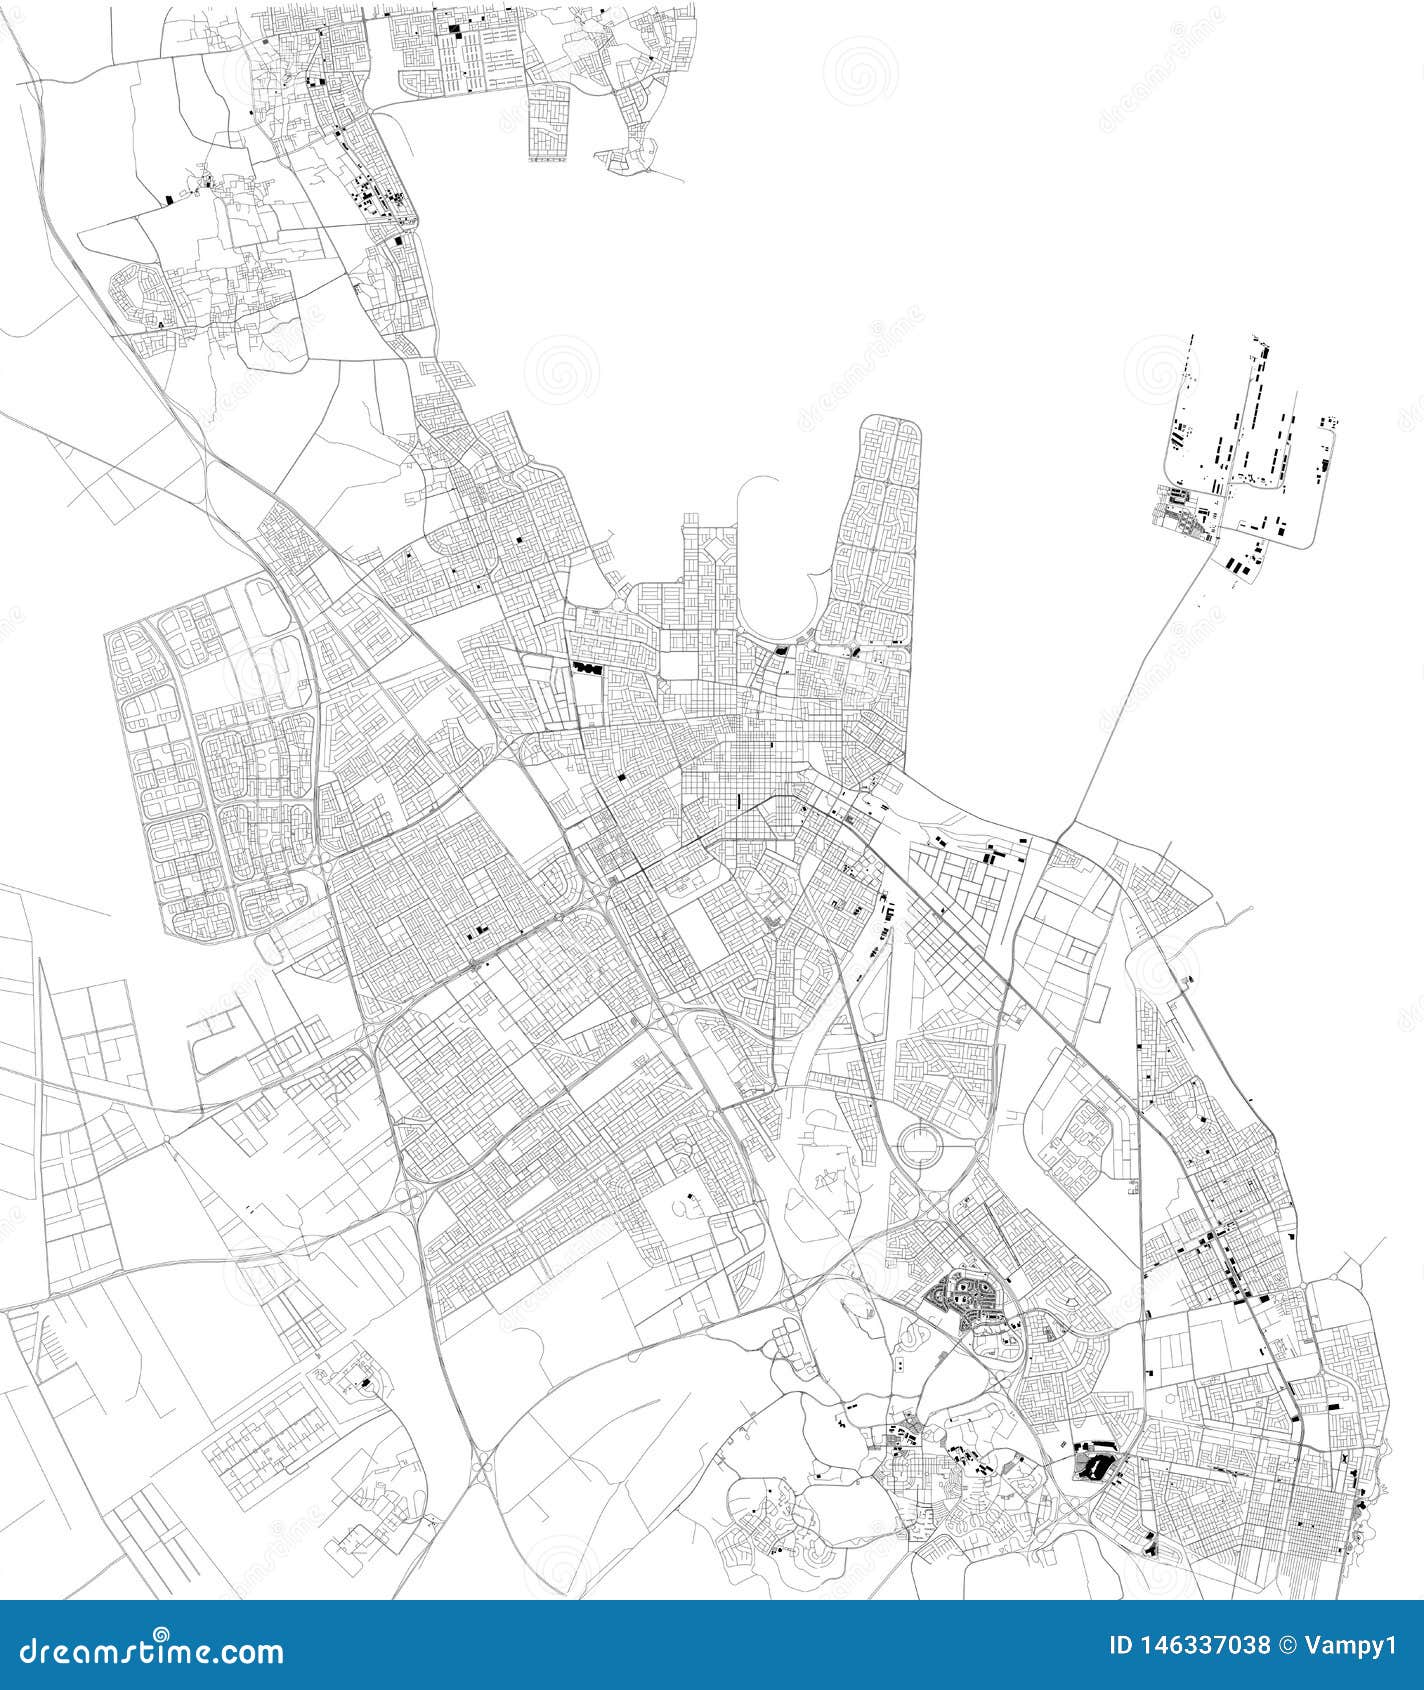 satellite map of dammam, saudi arabia. map of streets and buildings of the town center